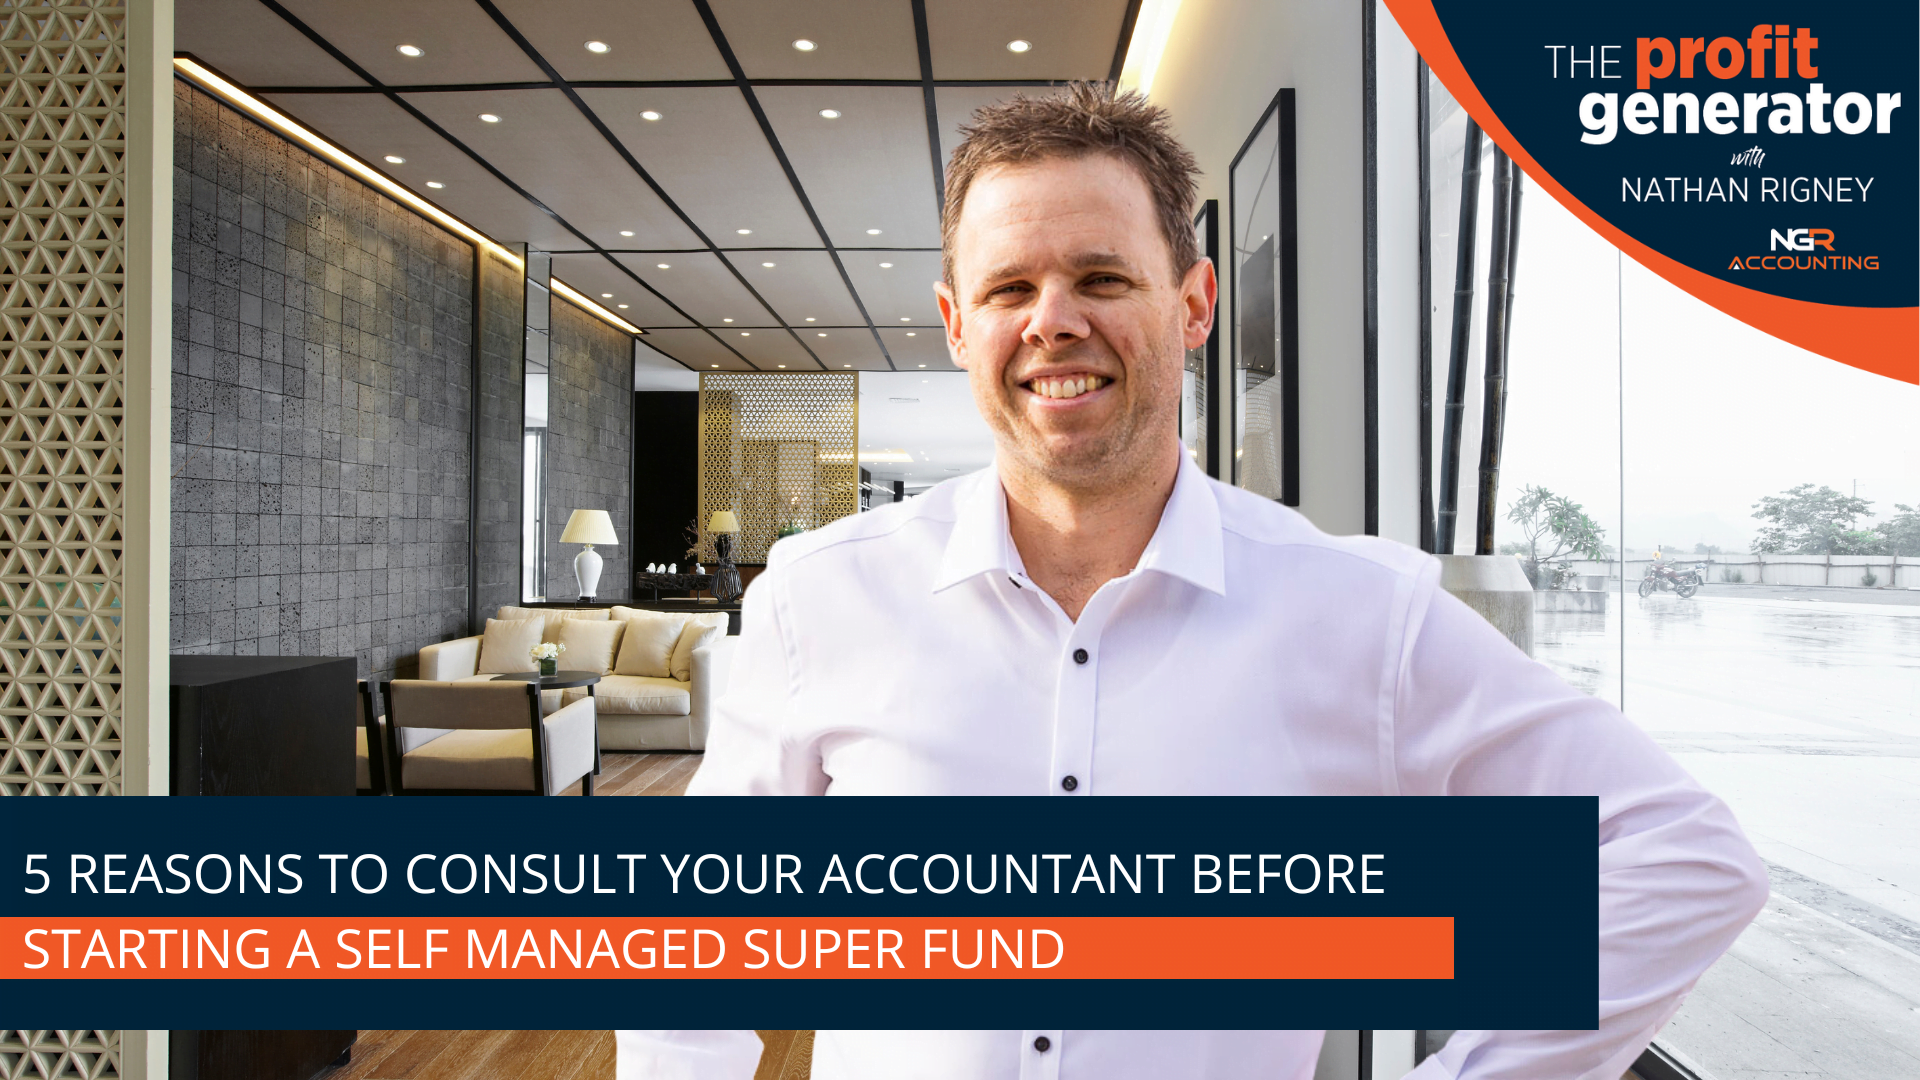 Considering a Self Managed Super Fund?